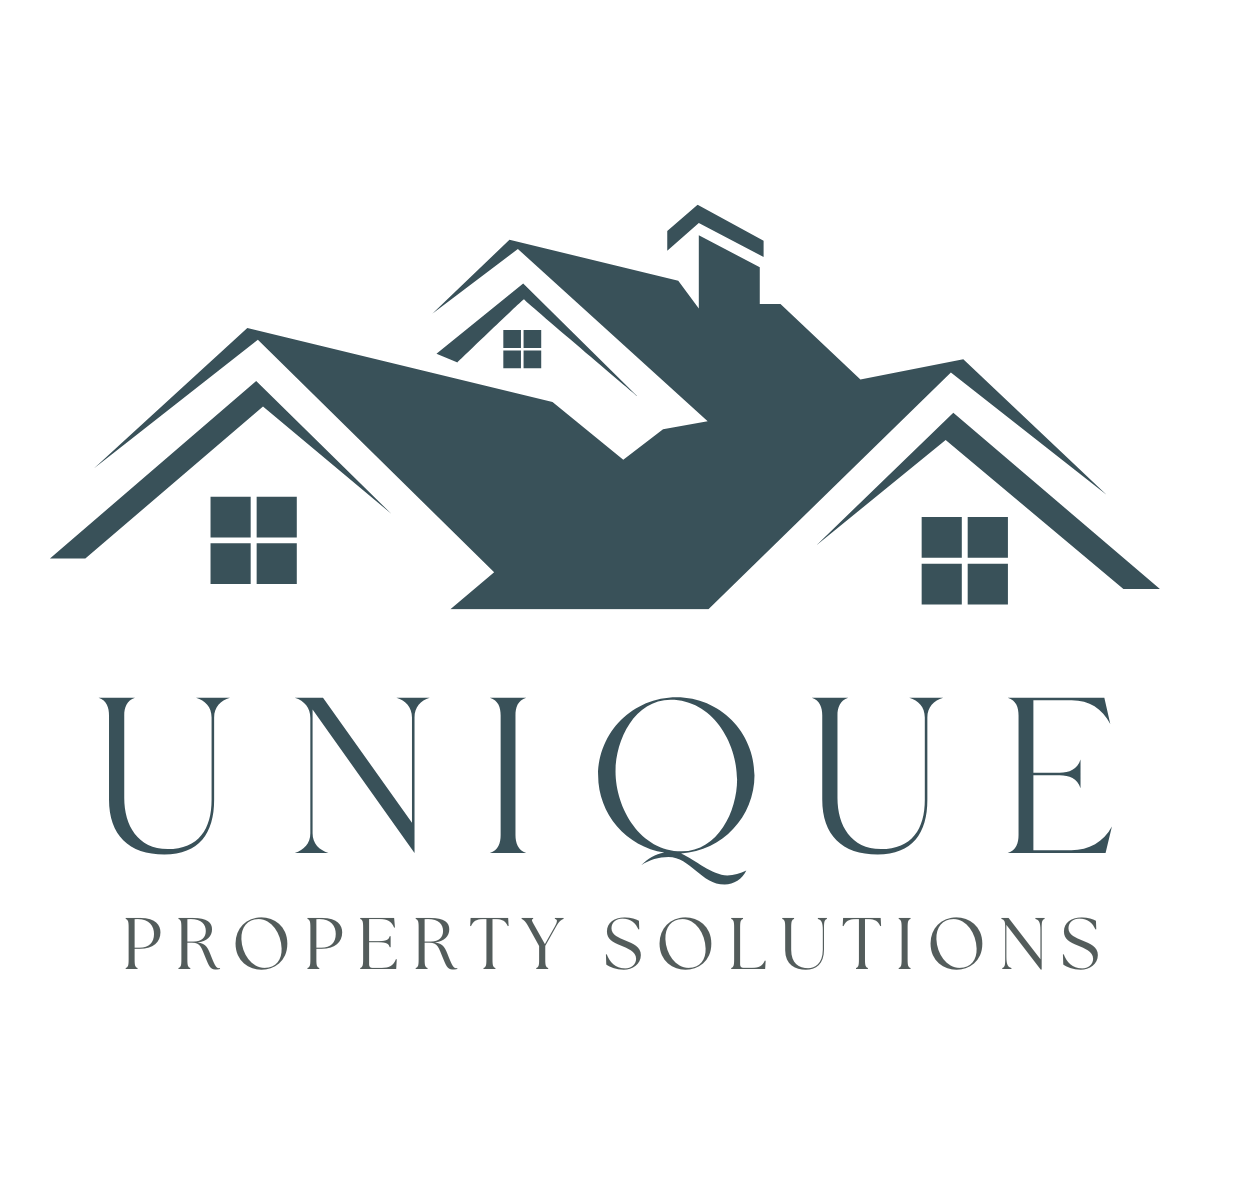 Unique Property Solutions mission is to create sustainable, durable, cost-efficient and disaster-resilient homes.